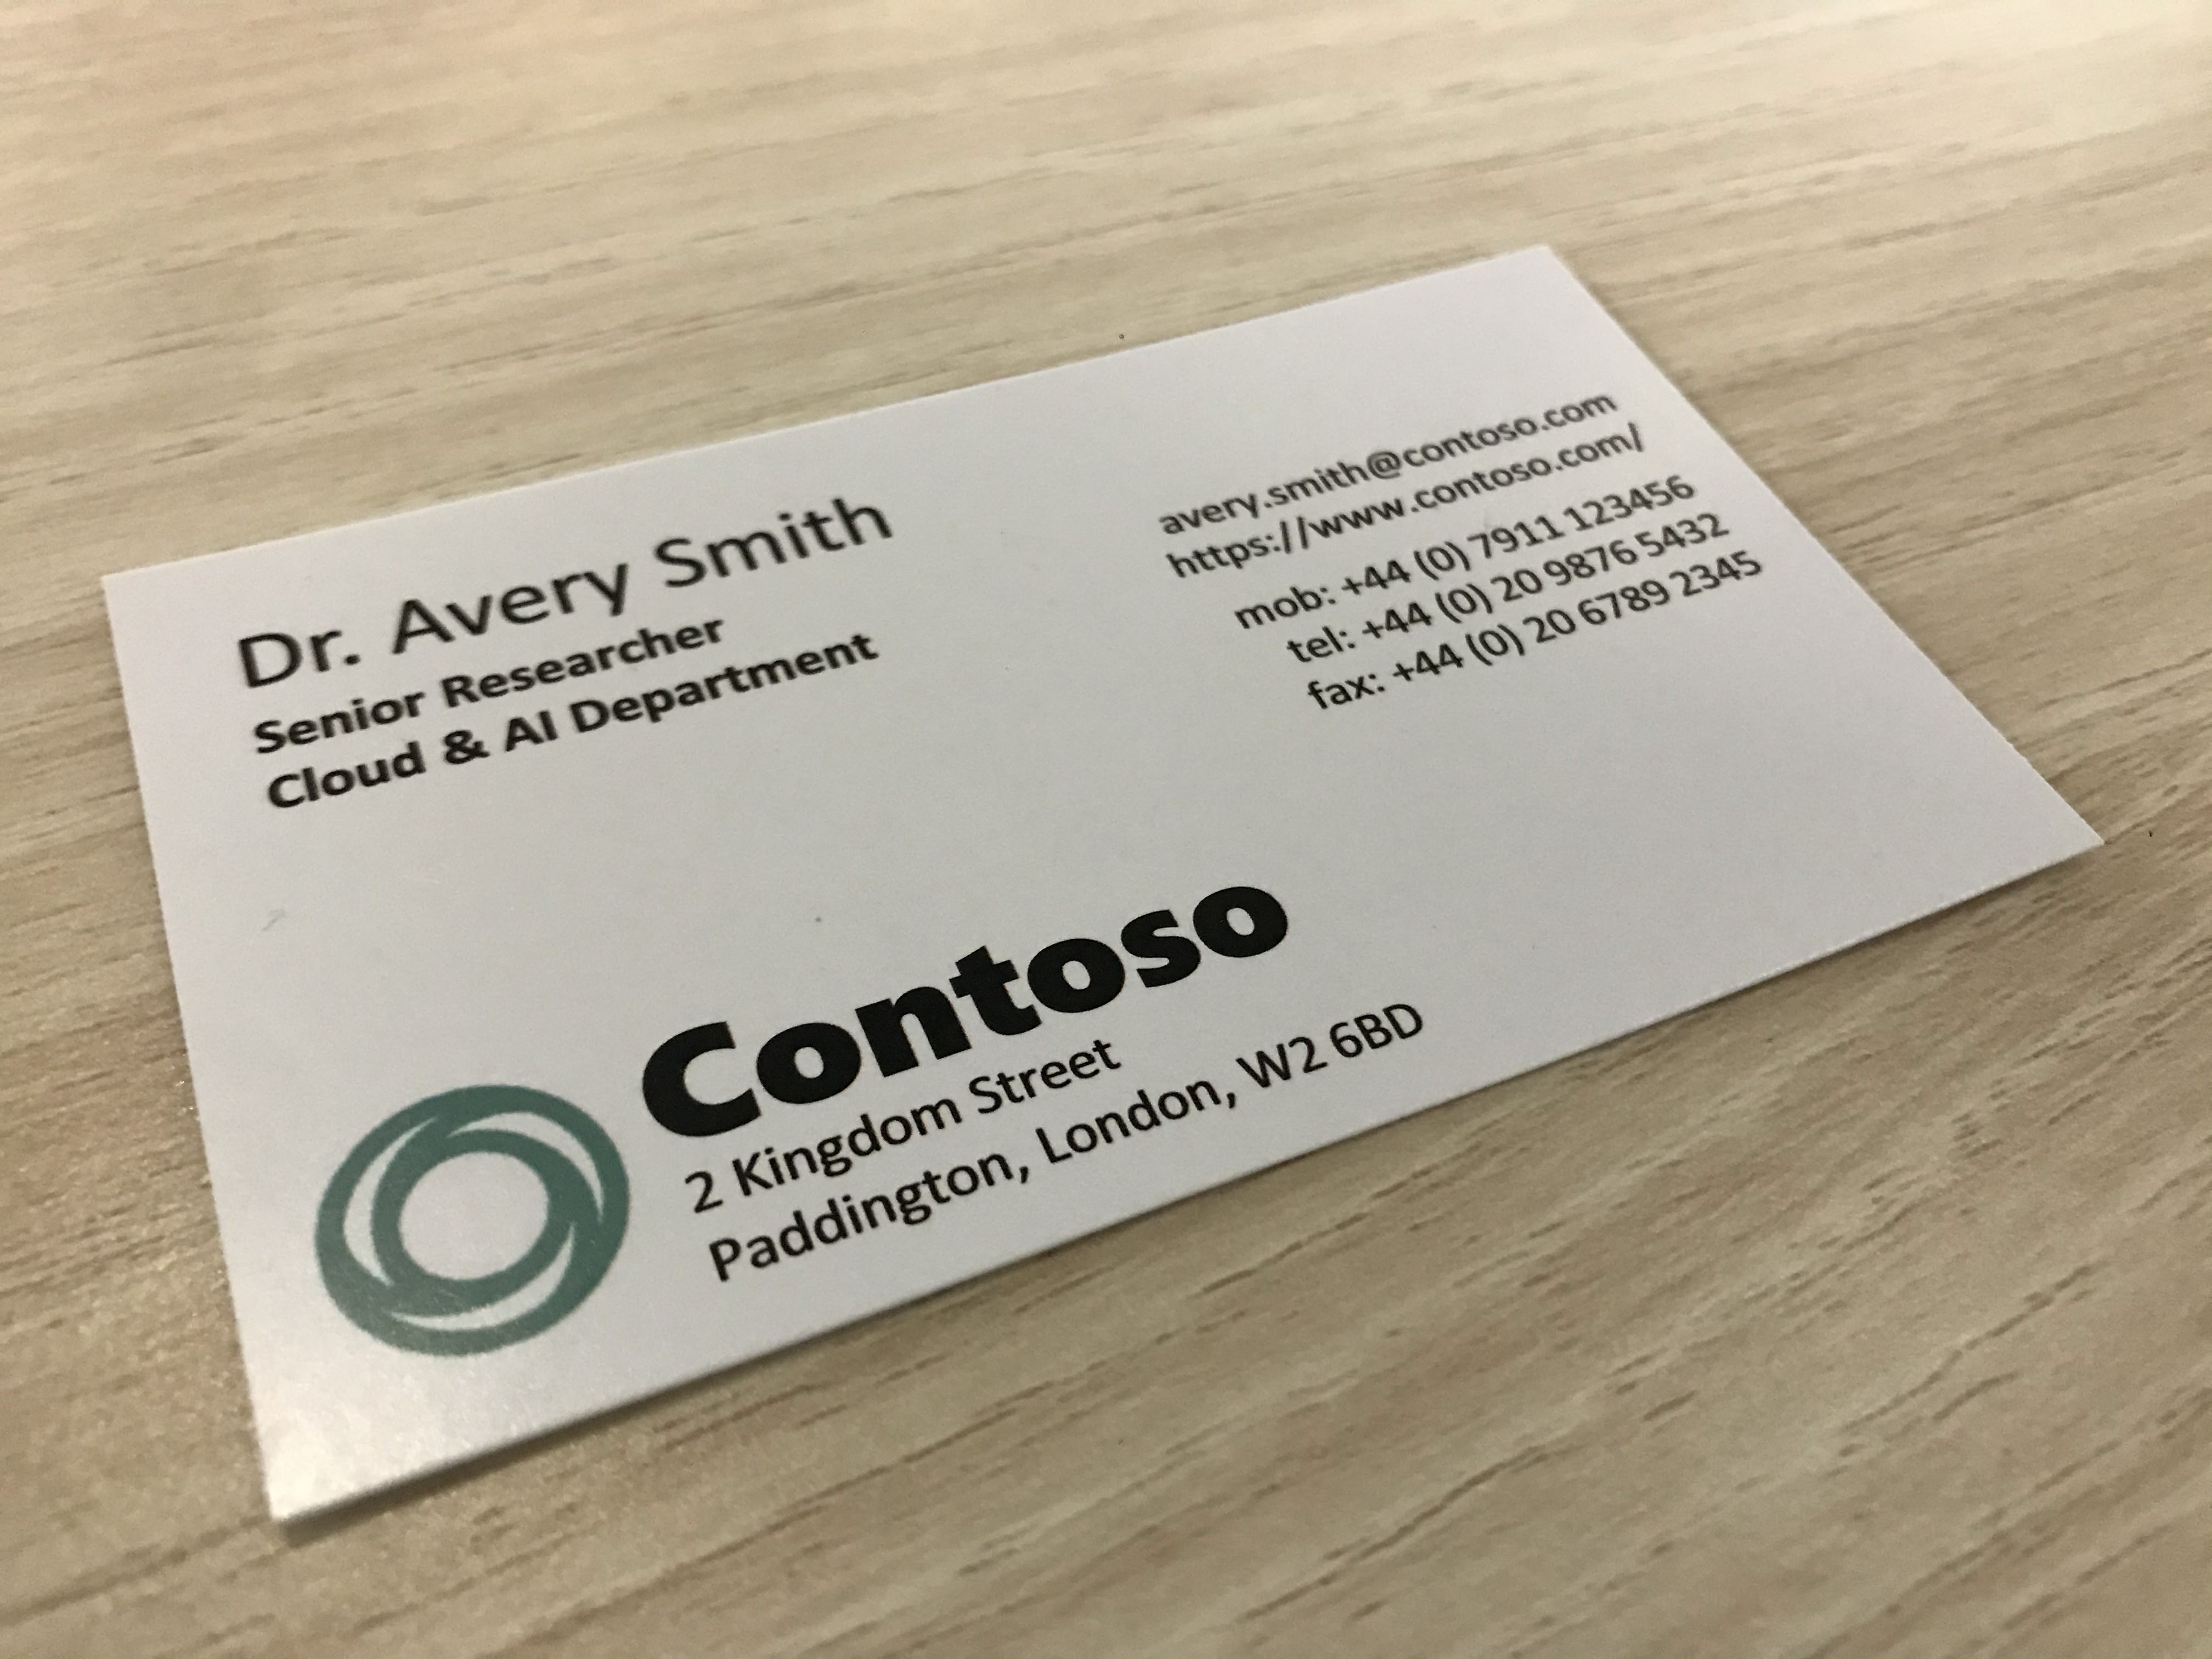 A business card from Contoso company